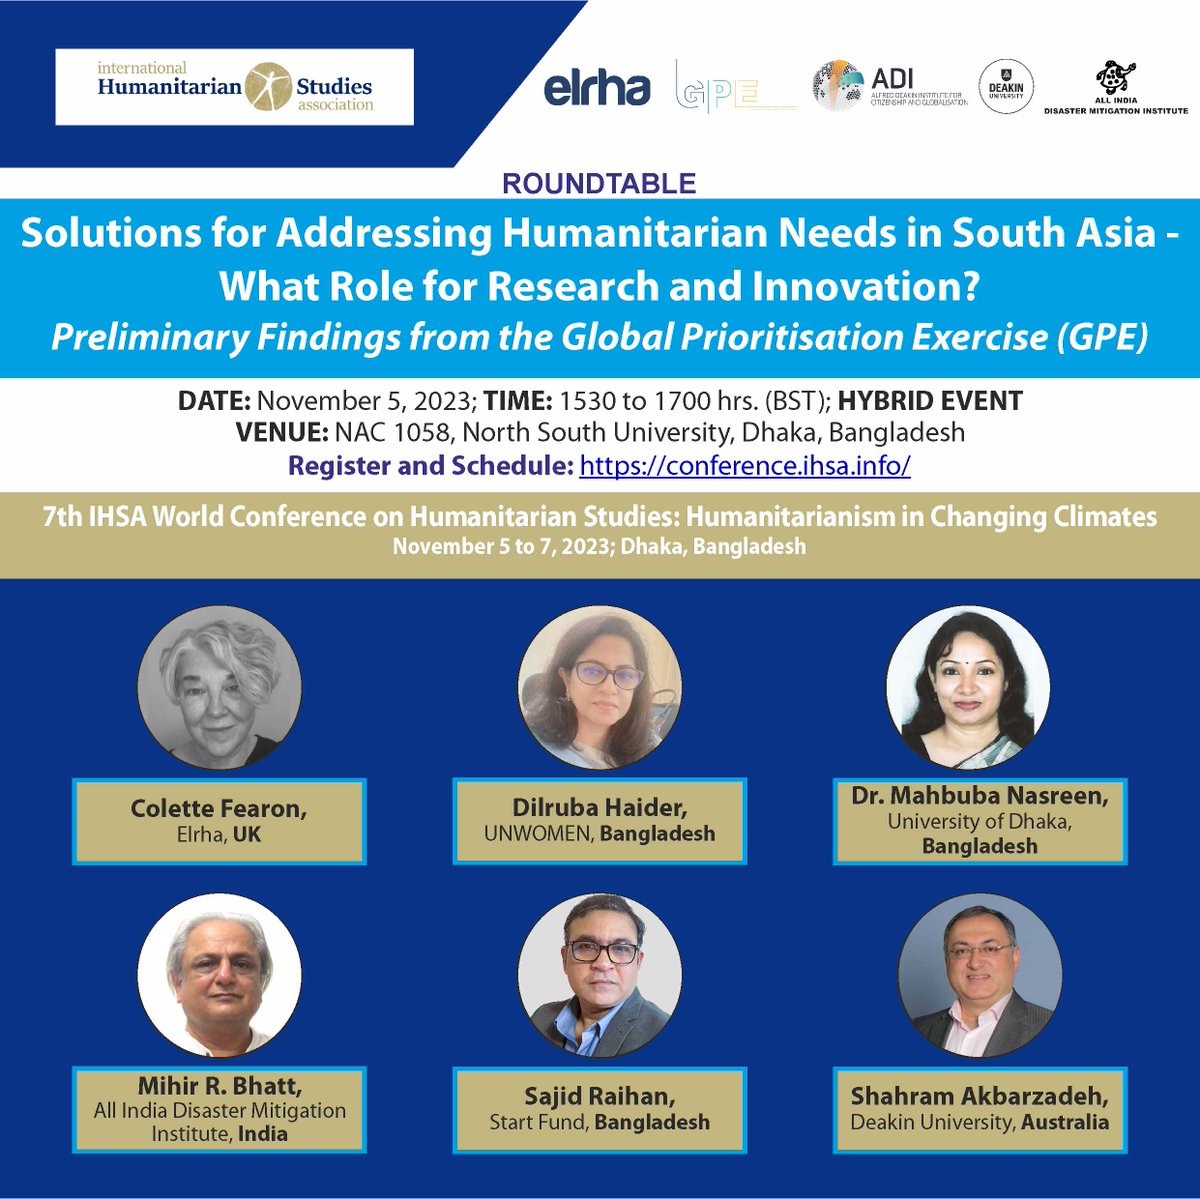 Join us in today Dhaka or online to engage in a roundtable on 'Solutions for Addressing Humanitarian Needs in South Asia - Role for Research and Innovation' on 7th IHSA conference on Humanitarian Studies! #IHSA #humanitarian #innovation